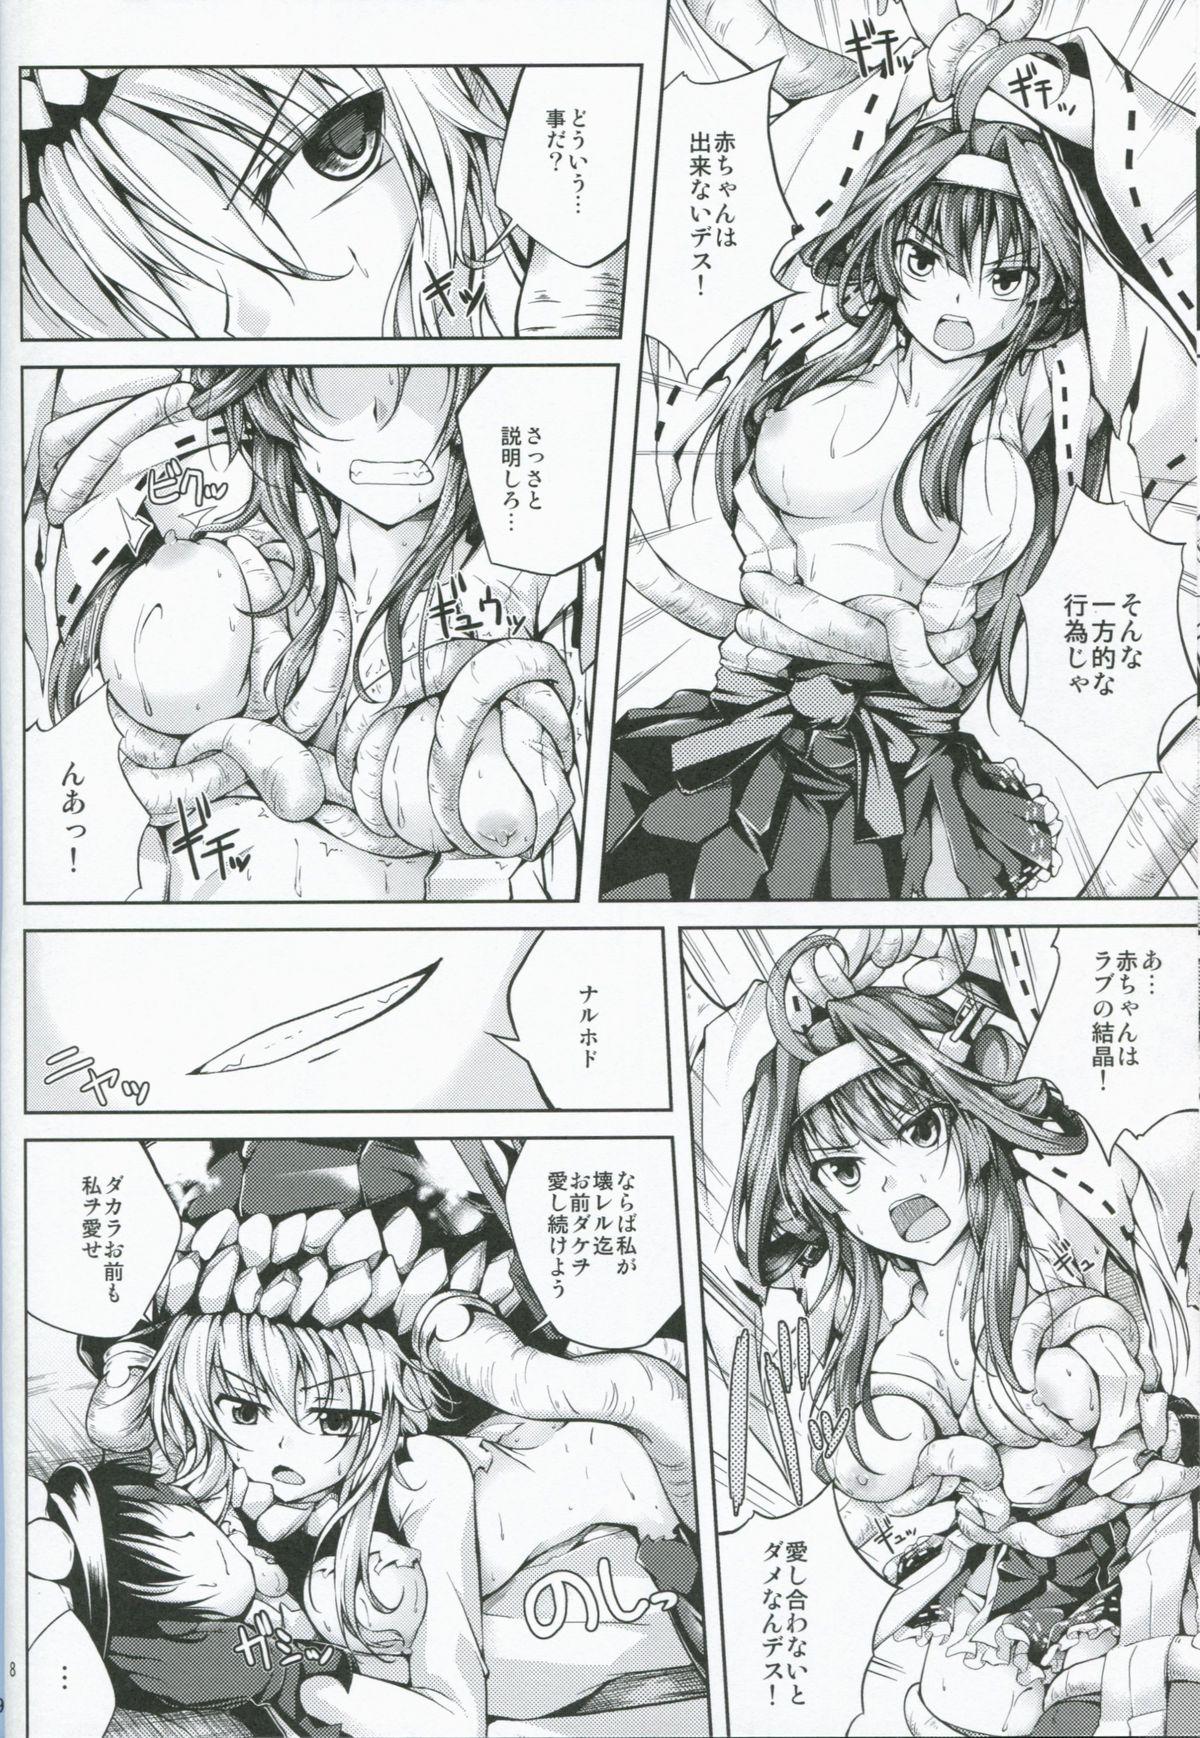 Love Making Koiiro Moyou 6 - Kantai collection 3some - Page 7